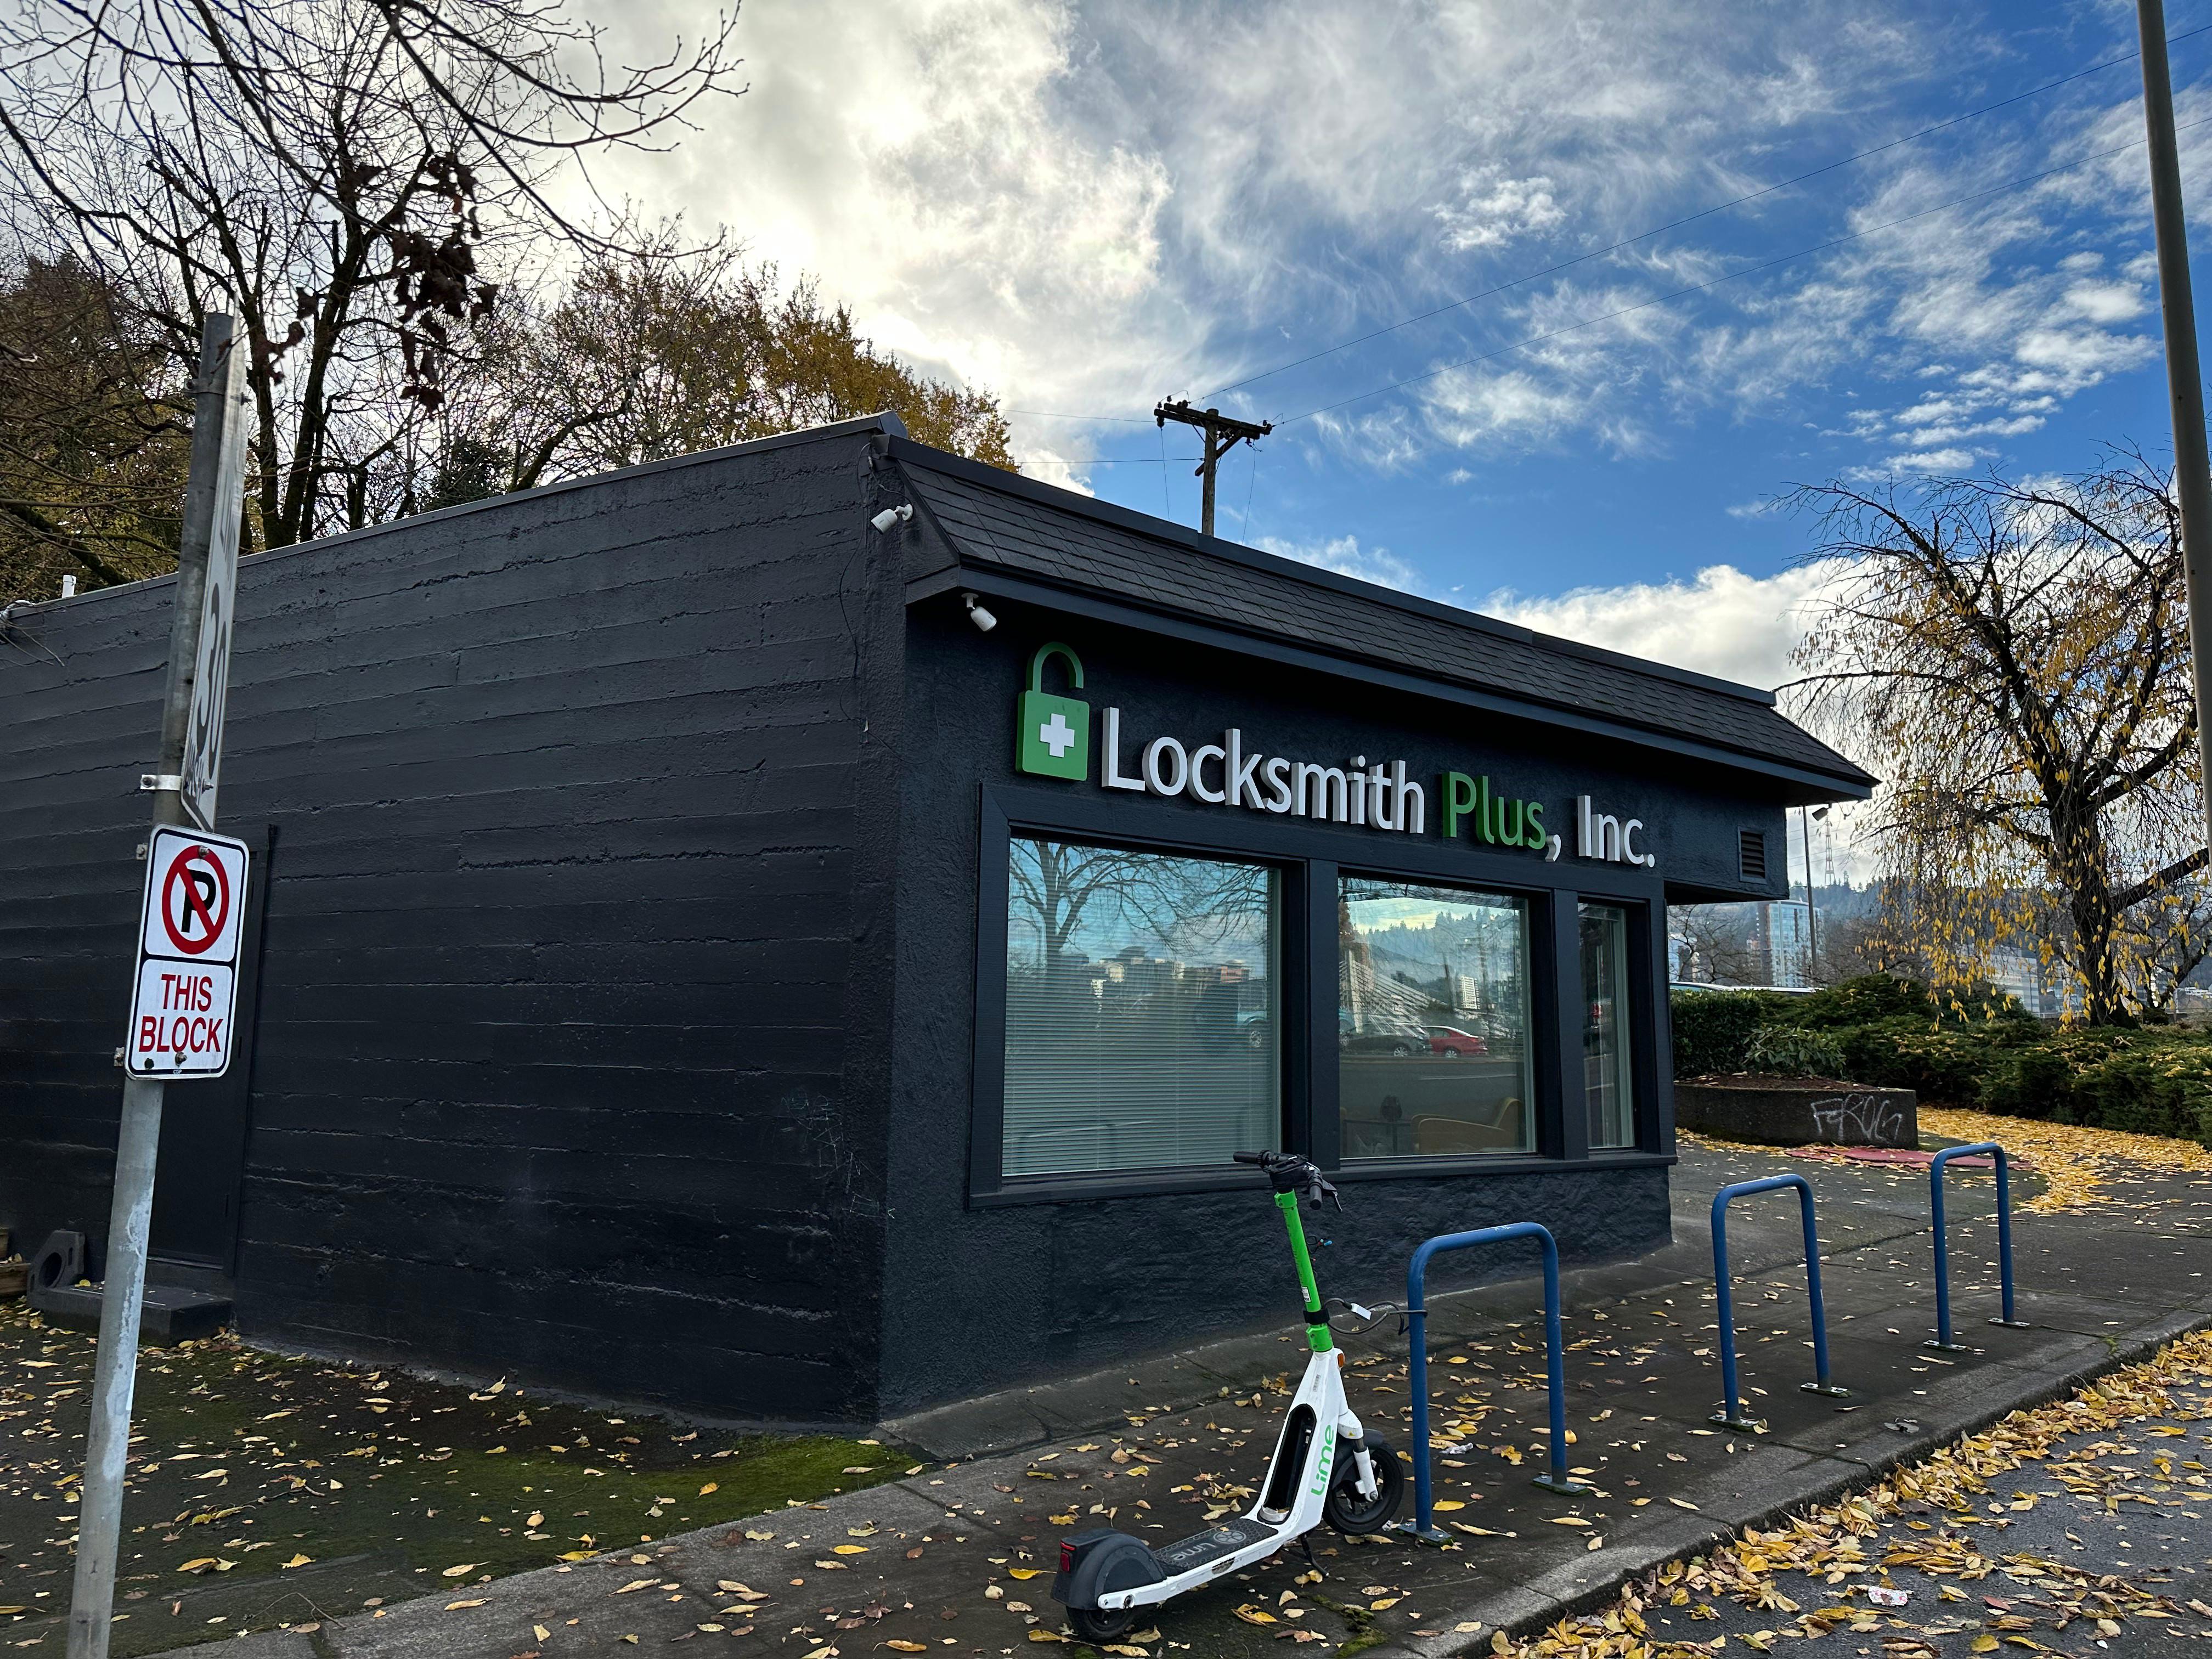 Locksmith Plus. Inc. has opened our second location in Portland, Oregon! Stop by the shop on weekdays between the hours of 9 AM and 5 PM. We are located at 600 SE Powell Blvd.